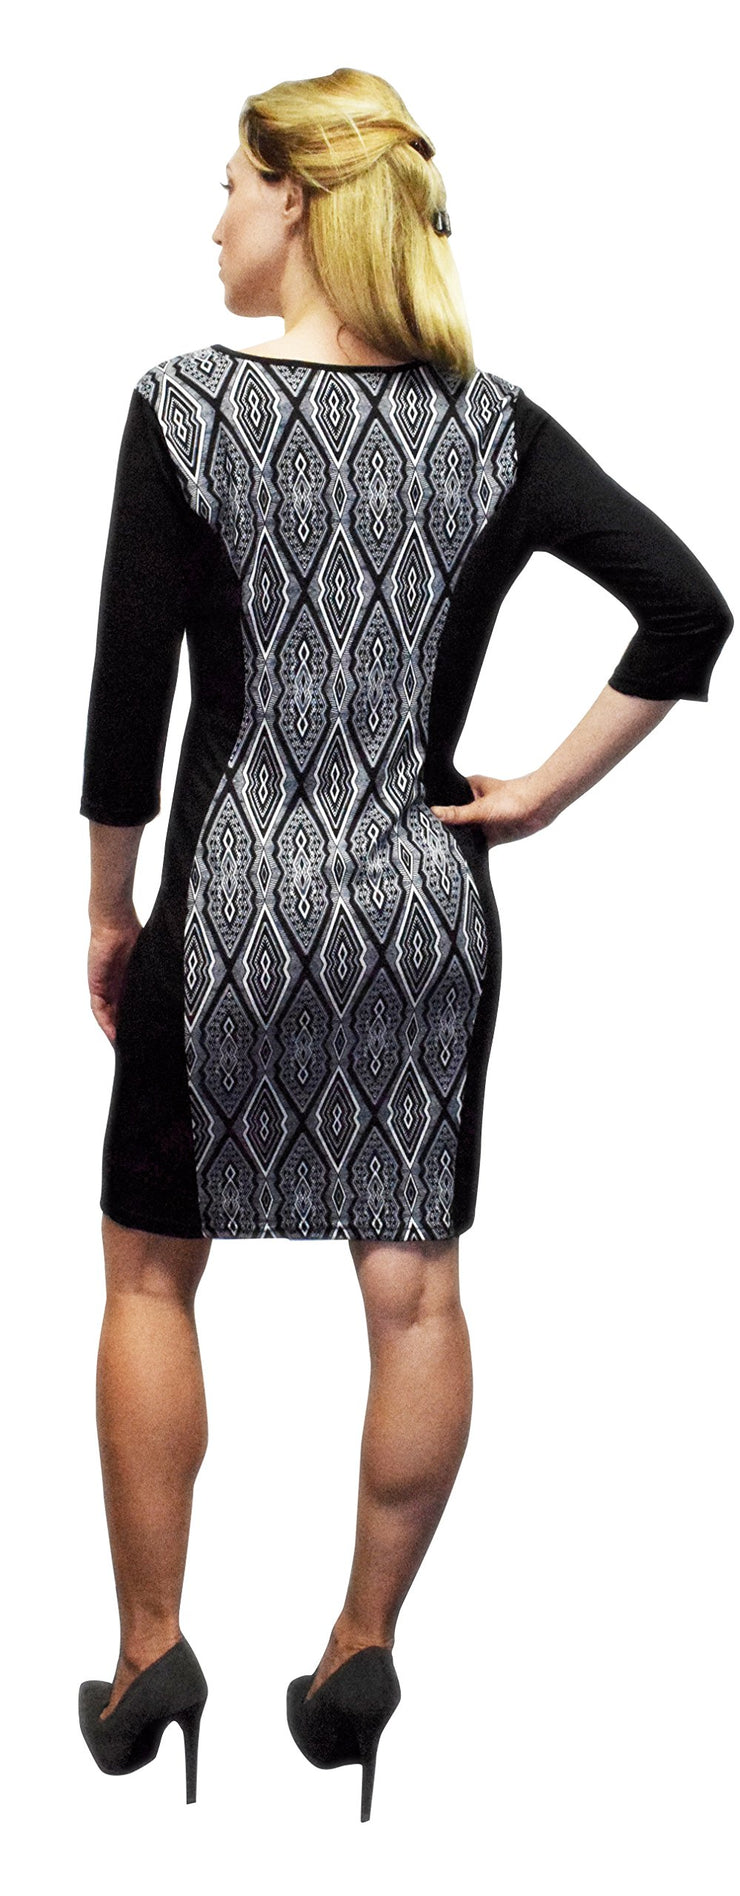 Peach Couture 3/4 Sleeves Chic Printed Work Business Party Sheath Slimming Dress